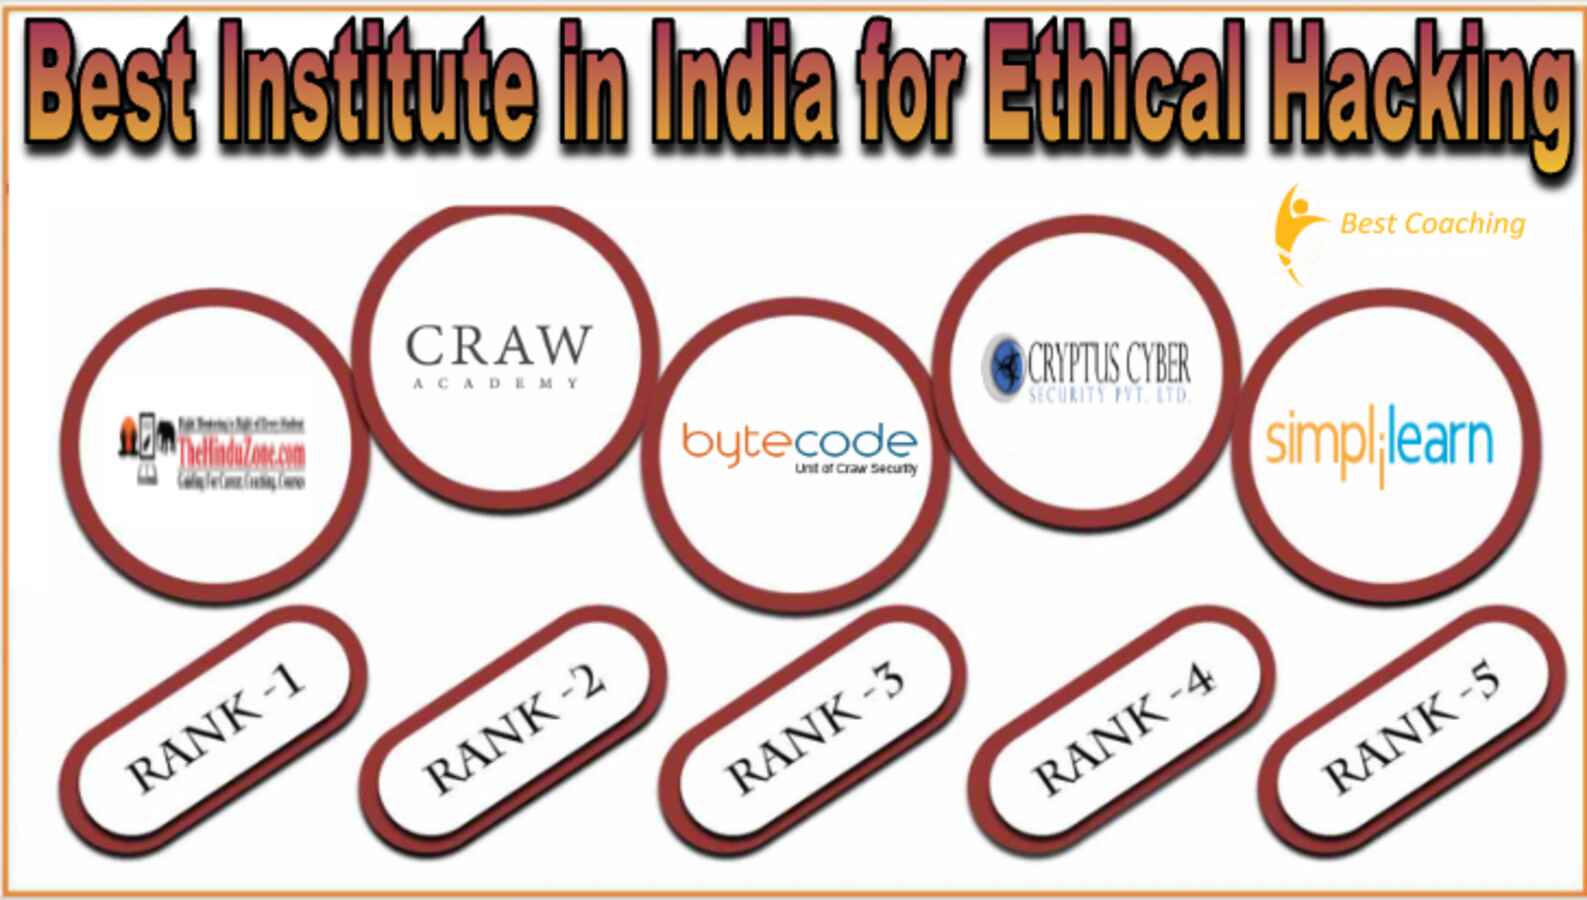 Best Institute in India for Ethical Hacking